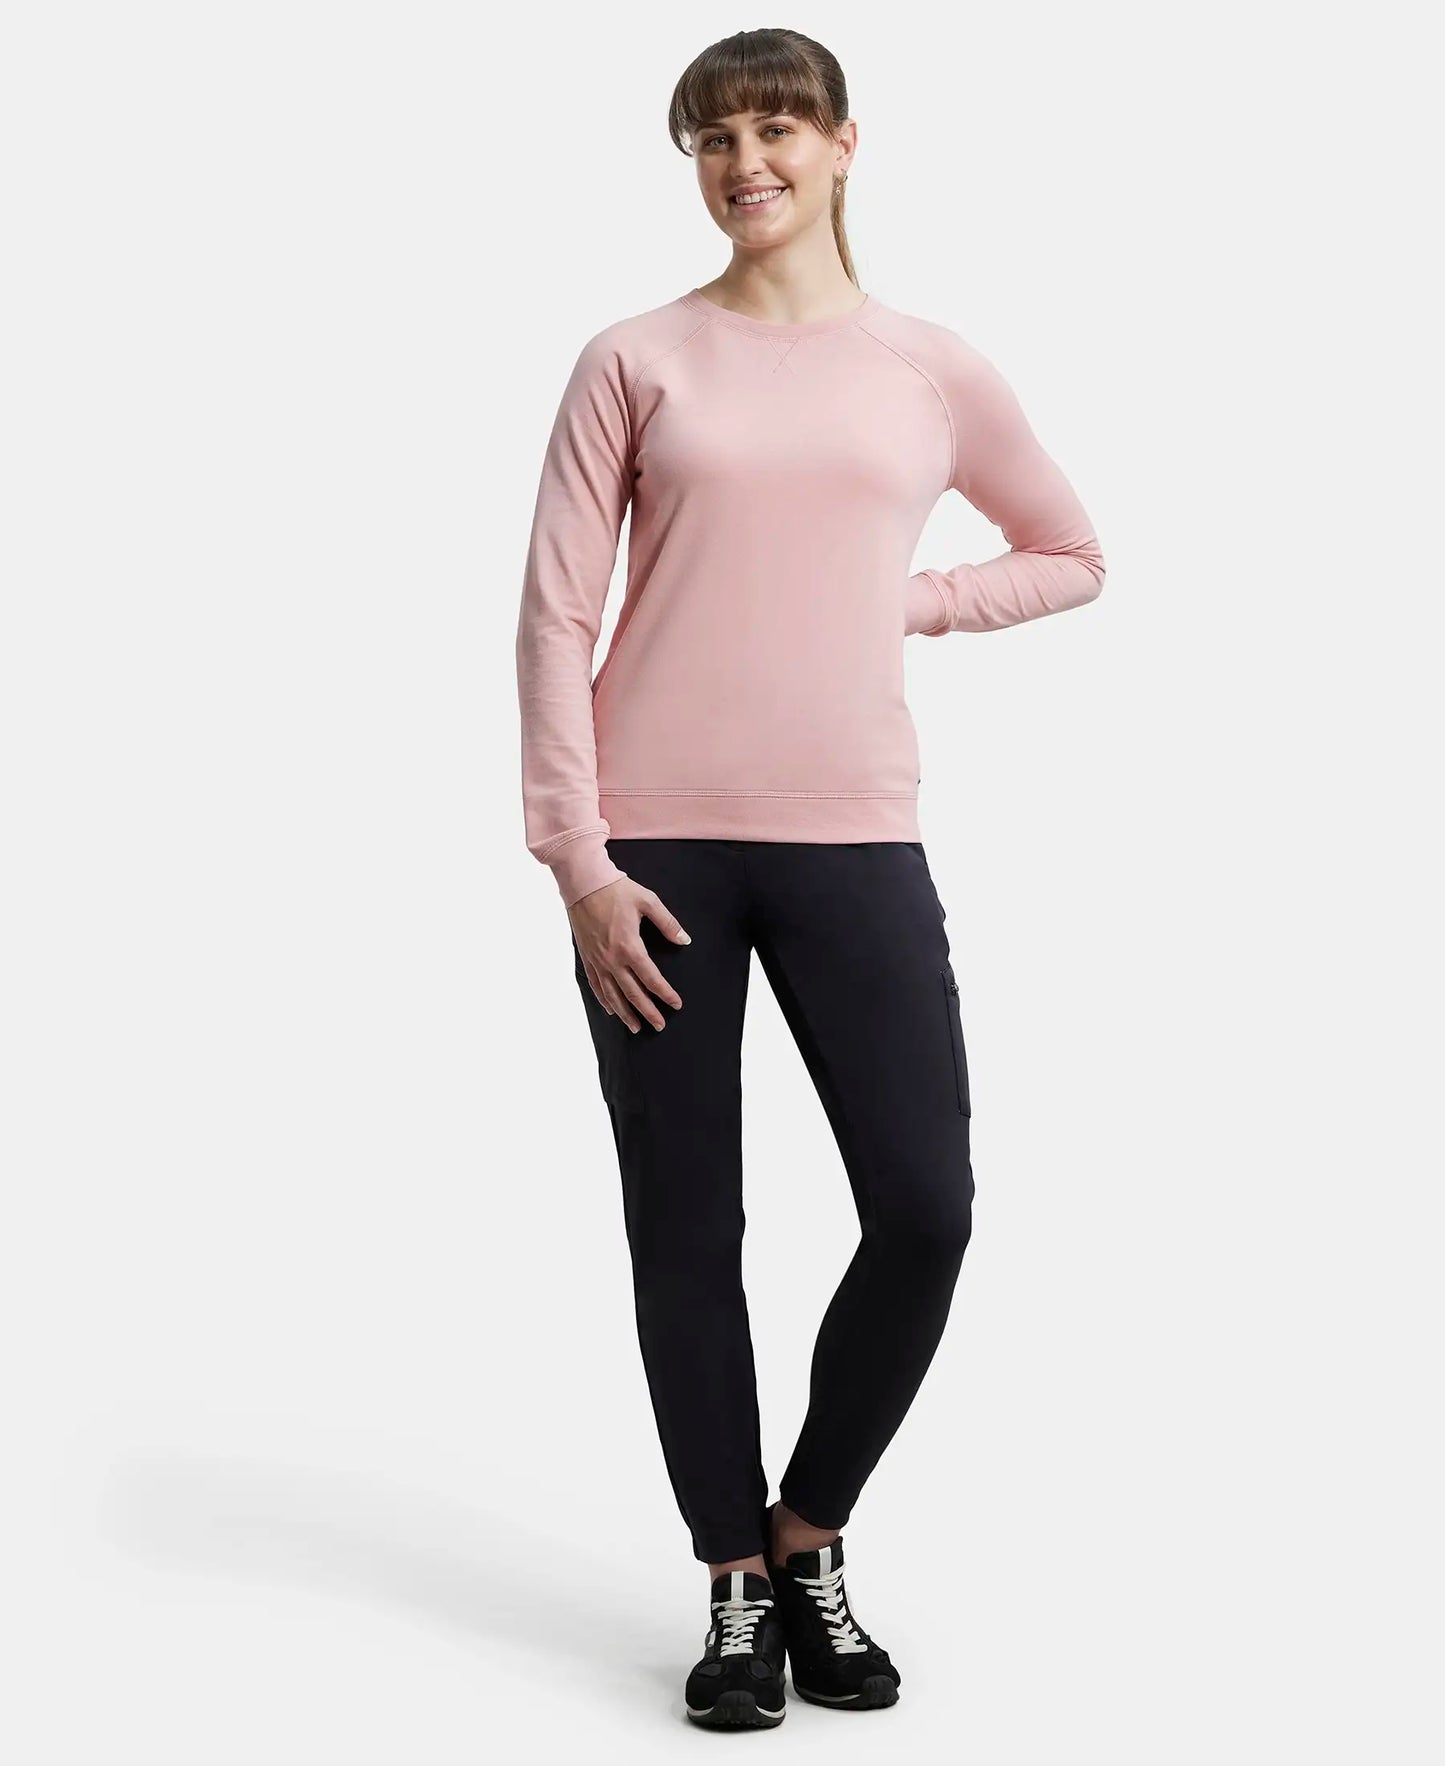 Super Combed Cotton Rich French Terry Fabric Solid Sweatshirt with Raglan Sleeve Styling - Blush-4